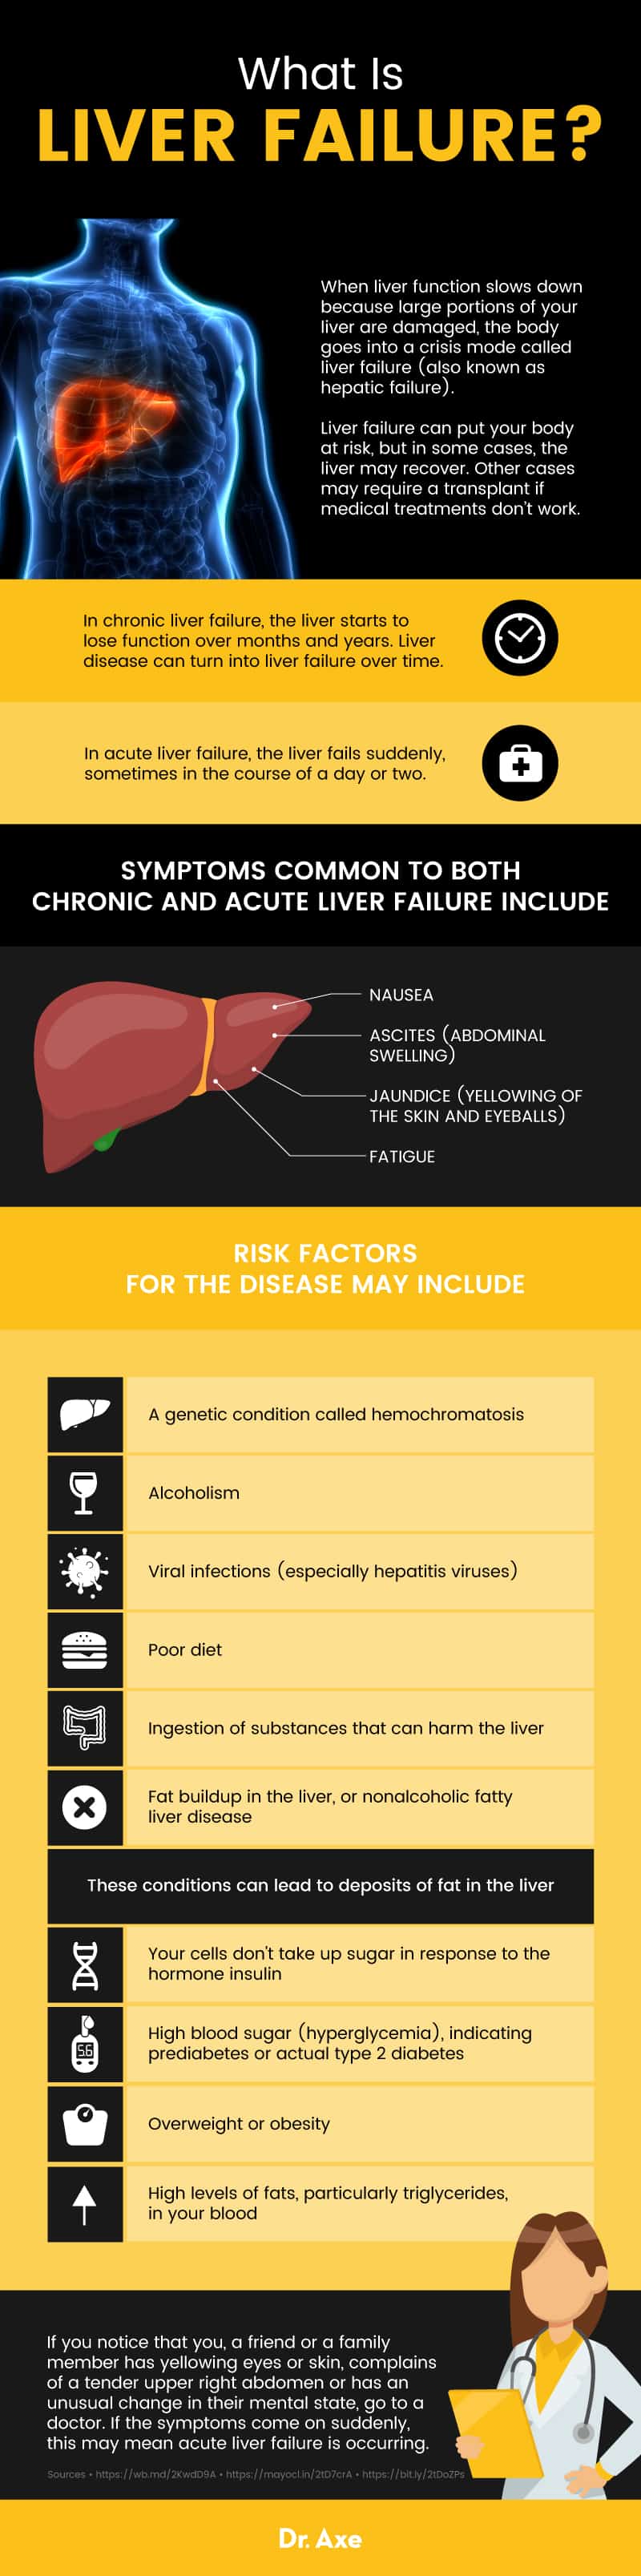 What is liver failure? - Dr. Axe